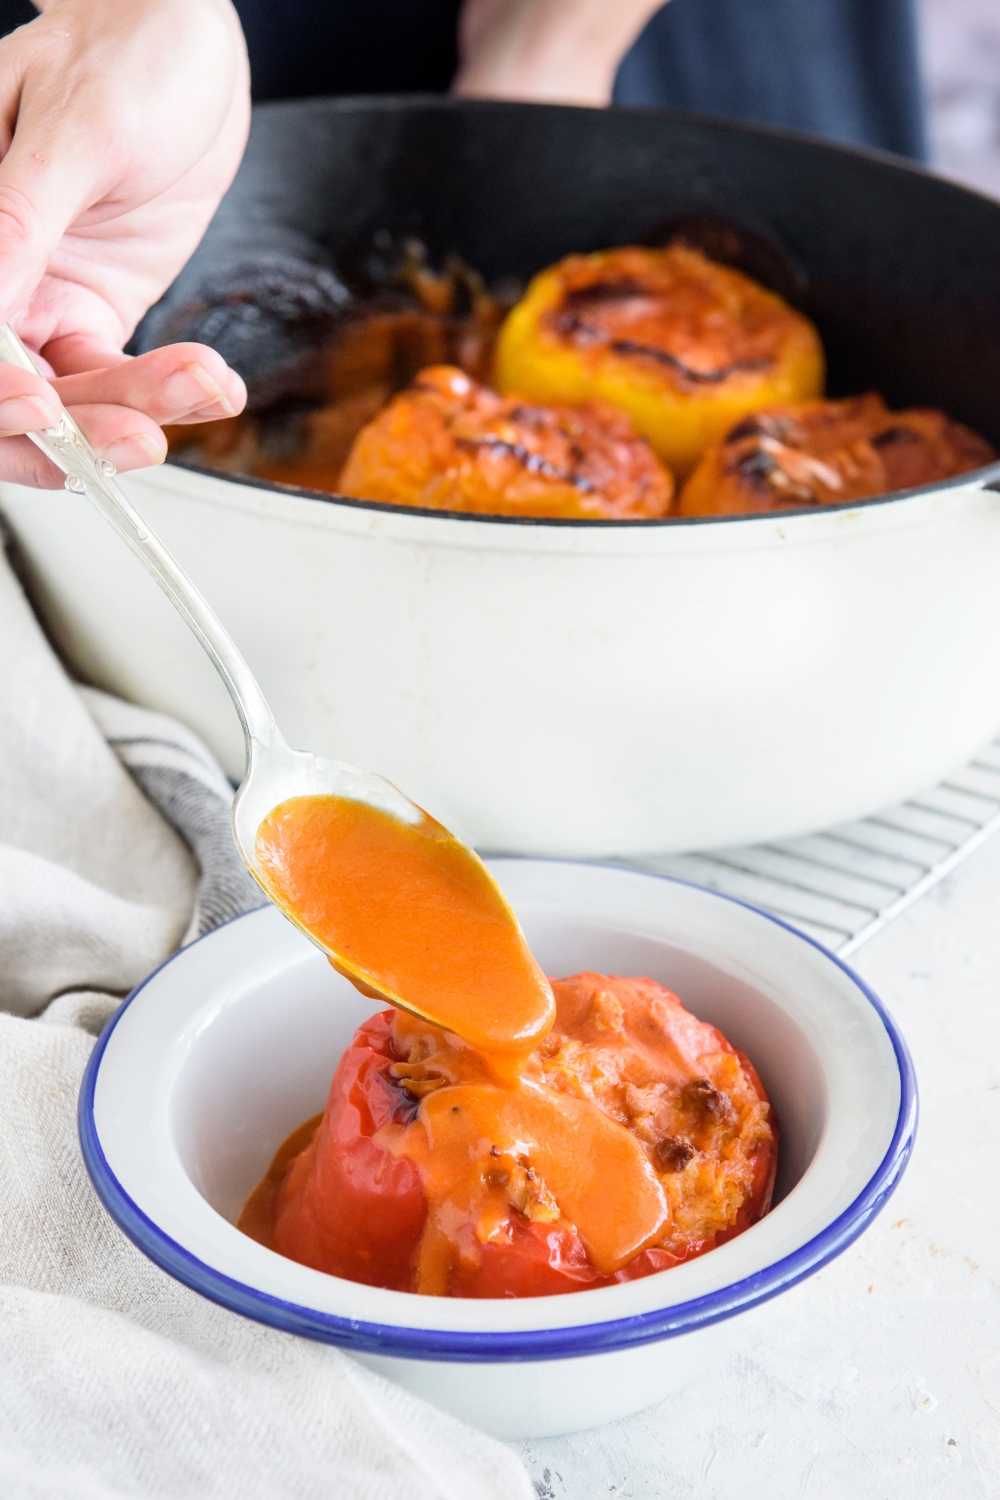 A hand spooning tomato sauce over a stuffed bell pepper. In the background is a baking dish filled with more stuffed peppers.